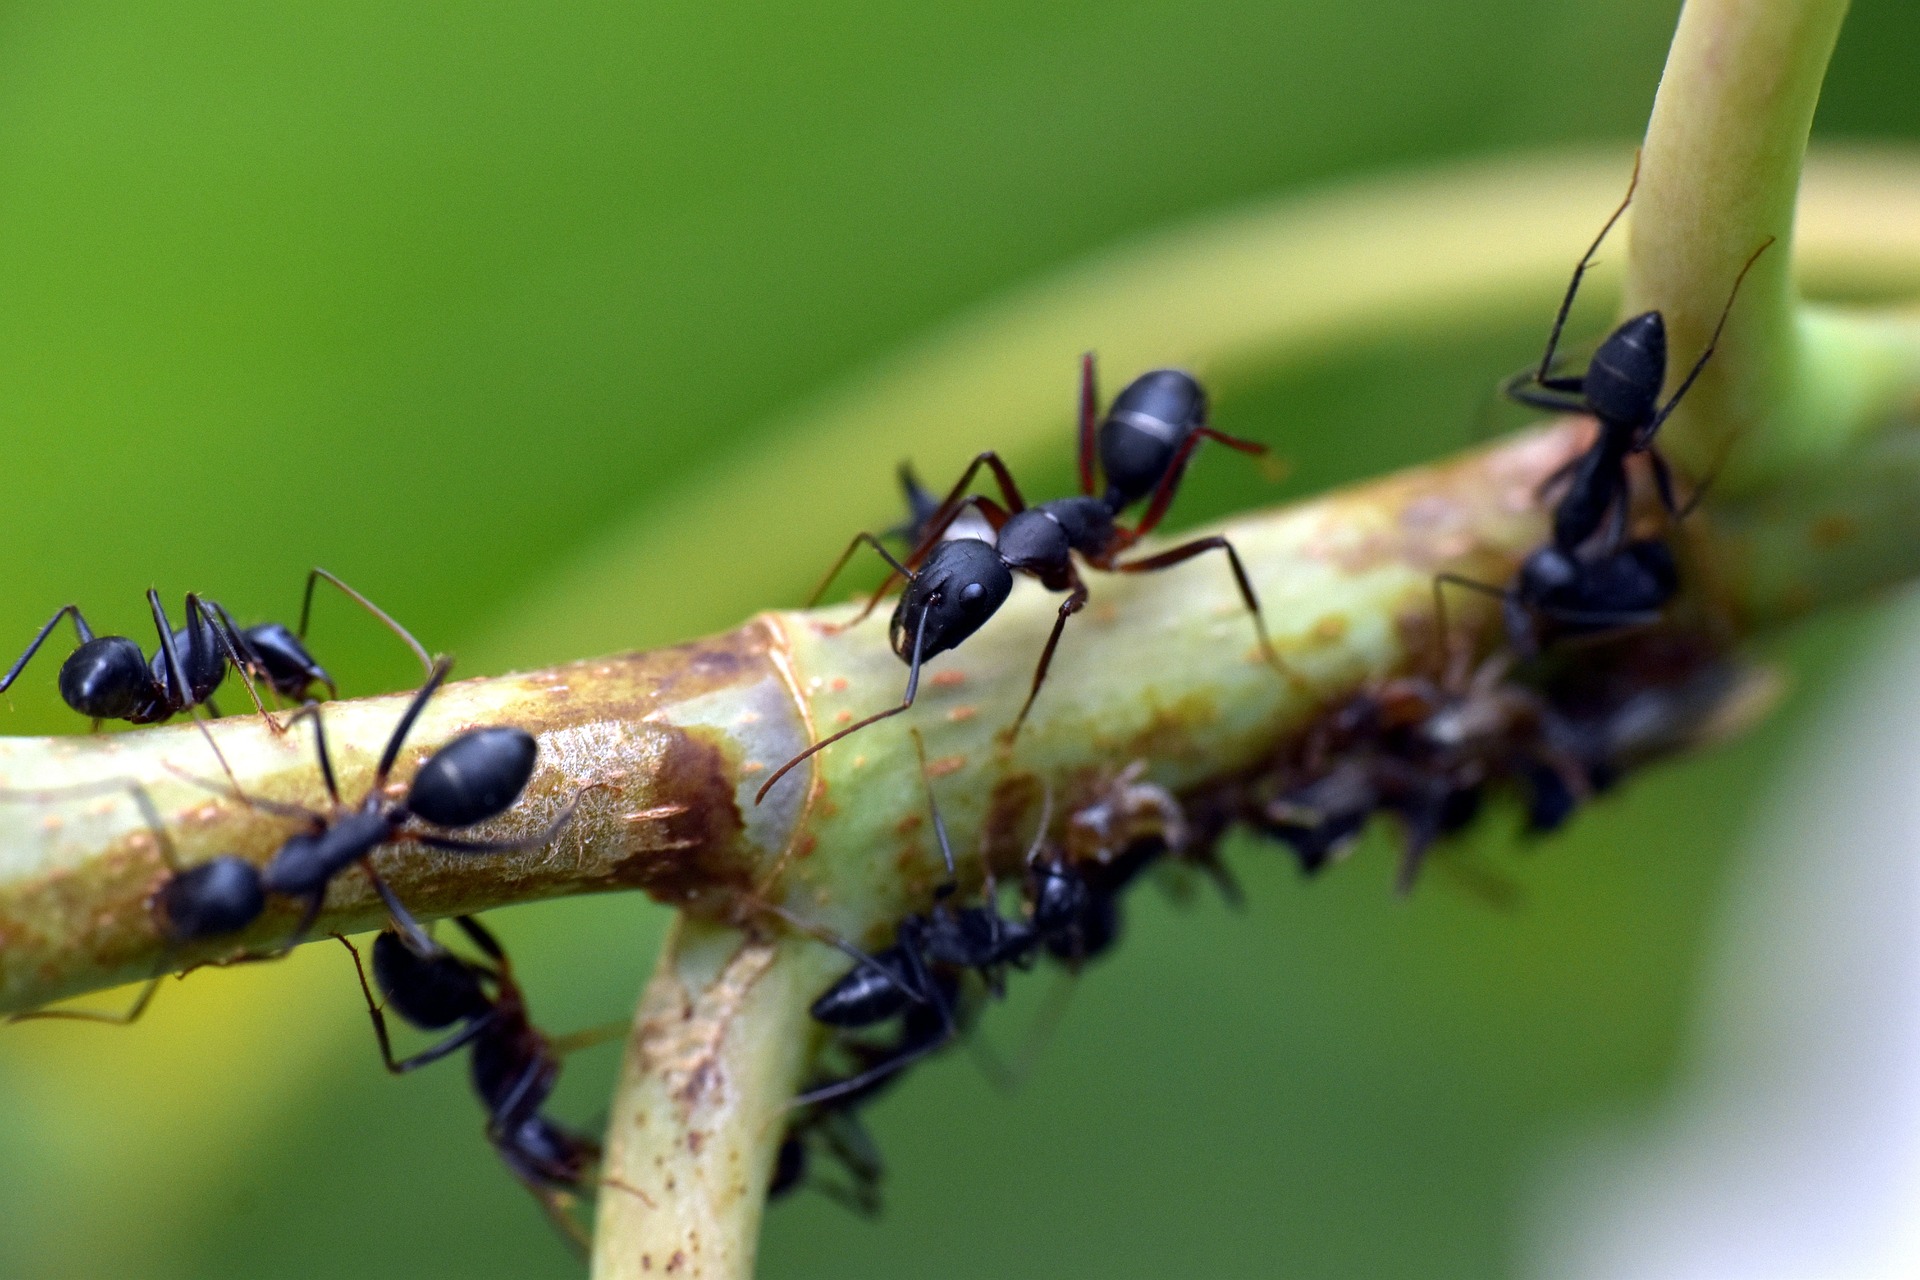 A line of ants crawling on a branch.